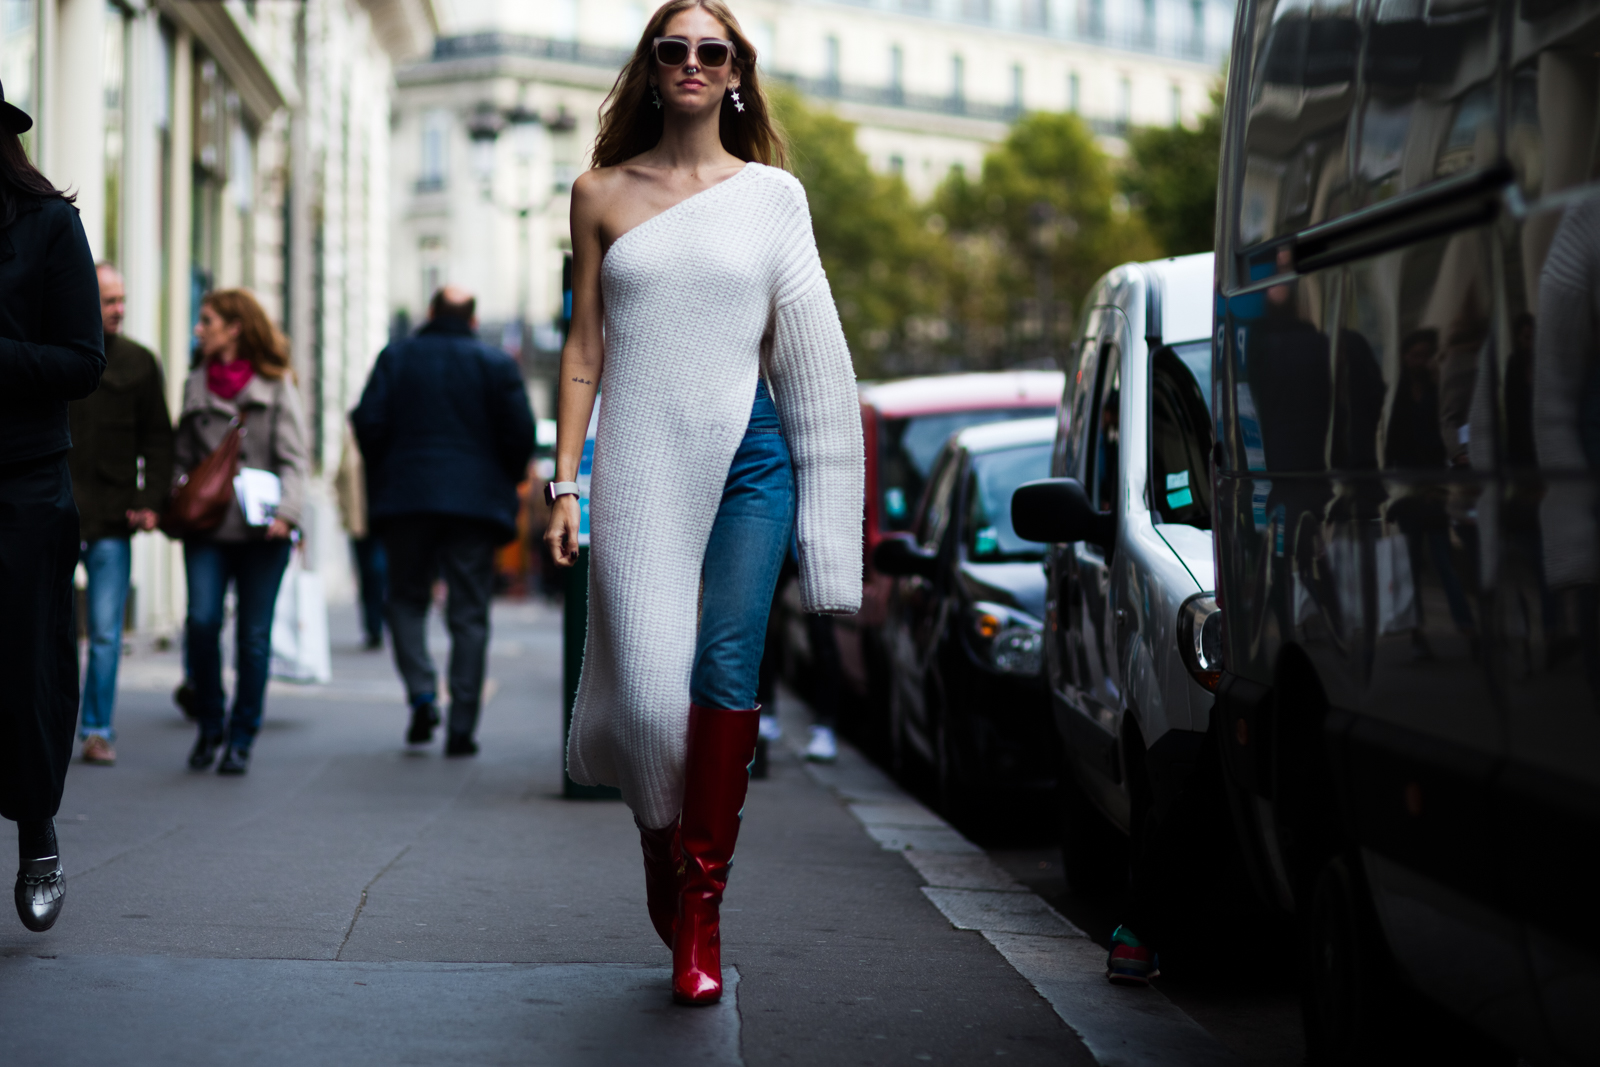 Chiara Ferragni wearing a white long sweater and jeans after the Stella McCartney fashion show in Paris, France